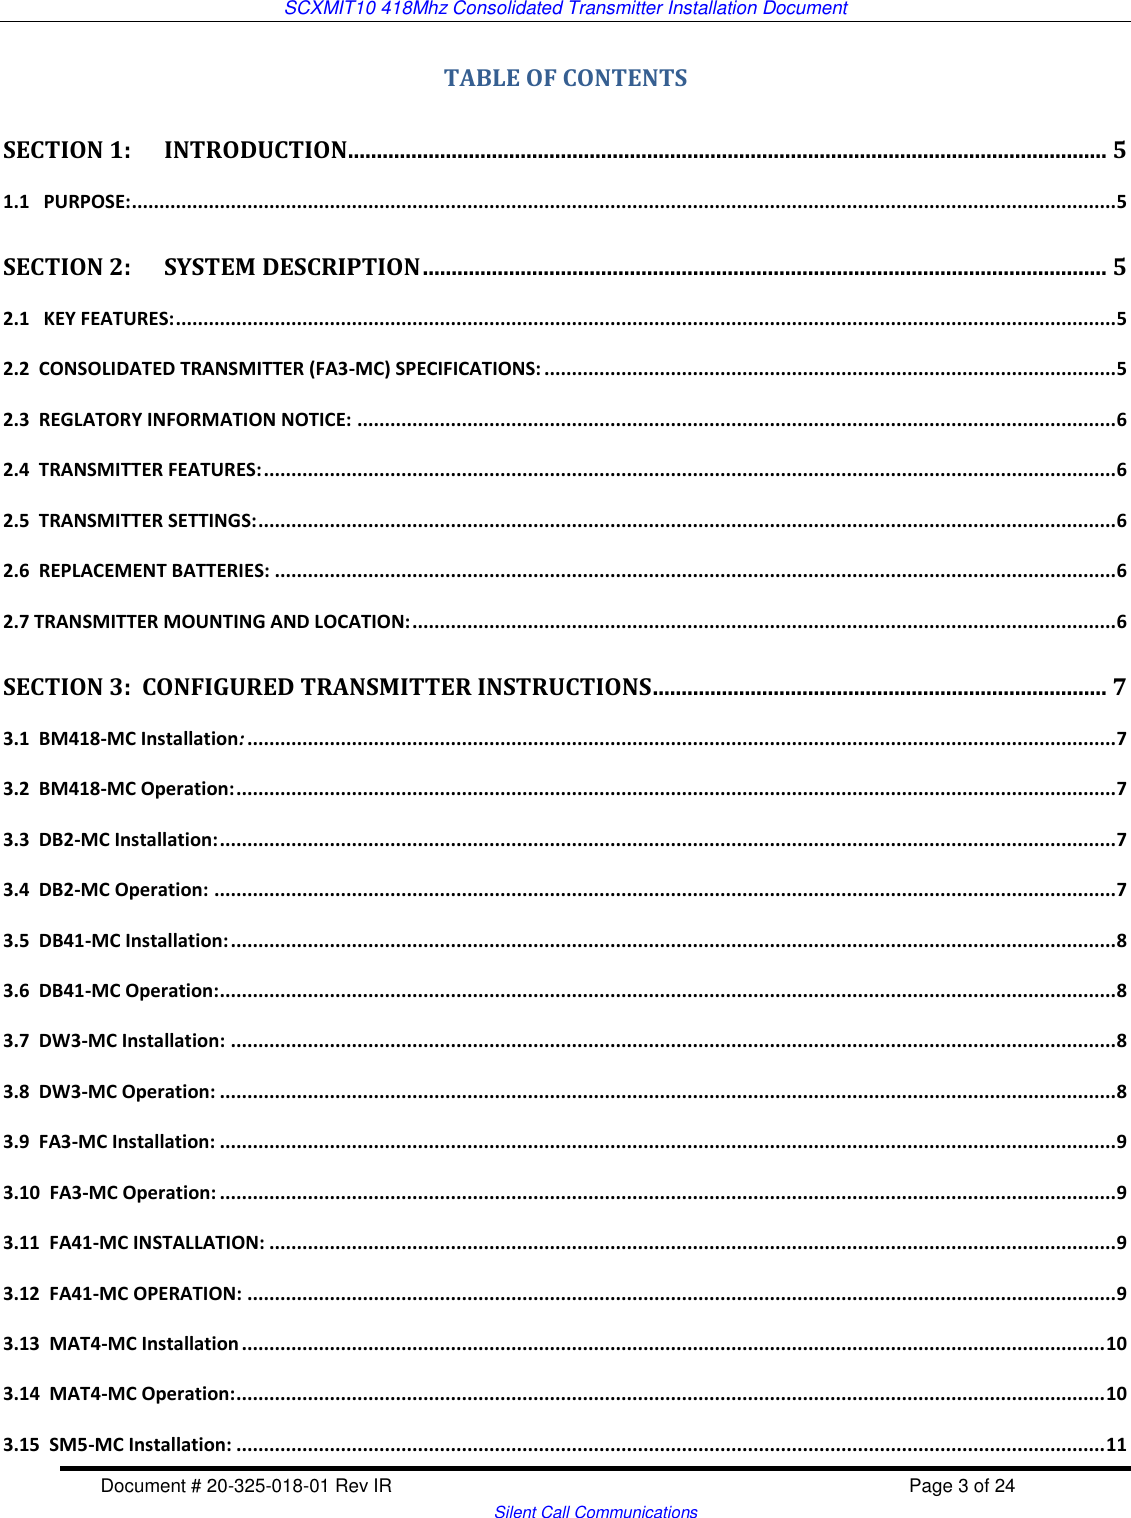 SCXMIT10 418Mhz Consolidated Transmitter Installation Document  Document # 20-325-018-01 Rev IR    Page 3 of 24   Silent Call Communications TABLE OF CONTENTS SECTION 1:      INTRODUCTION .................................................................................................................................... 5 1.1   PURPOSE: ................................................................................................................................................................................... 5 SECTION 2:      SYSTEM DESCRIPTION ....................................................................................................................... 5 2.1   KEY FEATURES: ........................................................................................................................................................................... 5 2.2  CONSOLIDATED TRANSMITTER (FA3-MC) SPECIFICATIONS: ........................................................................................................ 5 2.3  REGLATORY INFORMATION NOTICE: .......................................................................................................................................... 6 2.4  TRANSMITTER FEATURES: ........................................................................................................................................................... 6 2.5  TRANSMITTER SETTINGS: ............................................................................................................................................................ 6 2.6  REPLACEMENT BATTERIES: ......................................................................................................................................................... 6 2.7 TRANSMITTER MOUNTING AND LOCATION: ................................................................................................................................ 6 SECTION 3:  CONFIGURED TRANSMITTER INSTRUCTIONS ............................................................................... 7 3.1  BM418-MC Installation: .............................................................................................................................................................. 7 3.2  BM418-MC Operation: ................................................................................................................................................................ 7 3.3  DB2-MC Installation: ................................................................................................................................................................... 7 3.4  DB2-MC Operation: .................................................................................................................................................................... 7 3.5  DB41-MC Installation: ................................................................................................................................................................. 8 3.6  DB41-MC Operation: ................................................................................................................................................................... 8 3.7  DW3-MC Installation: ................................................................................................................................................................. 8 3.8  DW3-MC Operation: ................................................................................................................................................................... 8 3.9  FA3-MC Installation: ................................................................................................................................................................... 9 3.10  FA3-MC Operation: ................................................................................................................................................................... 9 3.11  FA41-MC INSTALLATION: .......................................................................................................................................................... 9 3.12  FA41-MC OPERATION: .............................................................................................................................................................. 9 3.13  MAT4-MC Installation ............................................................................................................................................................. 10 3.14  MAT4-MC Operation: .............................................................................................................................................................. 10 3.15  SM5-MC Installation: .............................................................................................................................................................. 11 